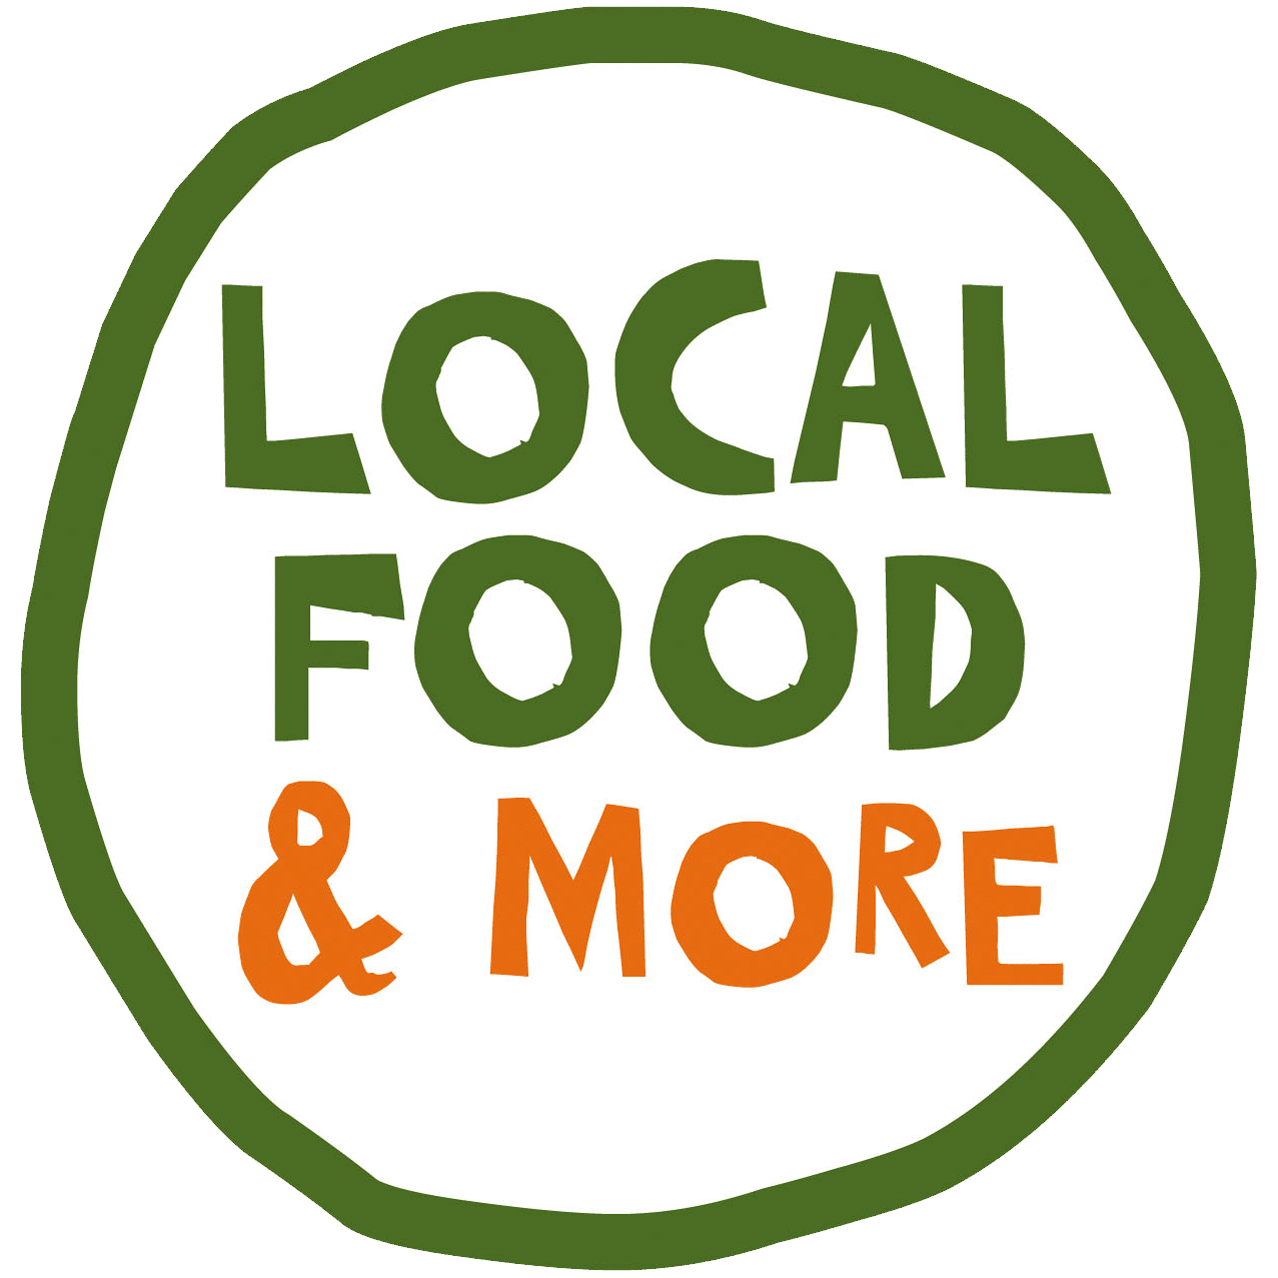 EAT LOCAL, EAT WELL WHERE THE LOCAL EAT